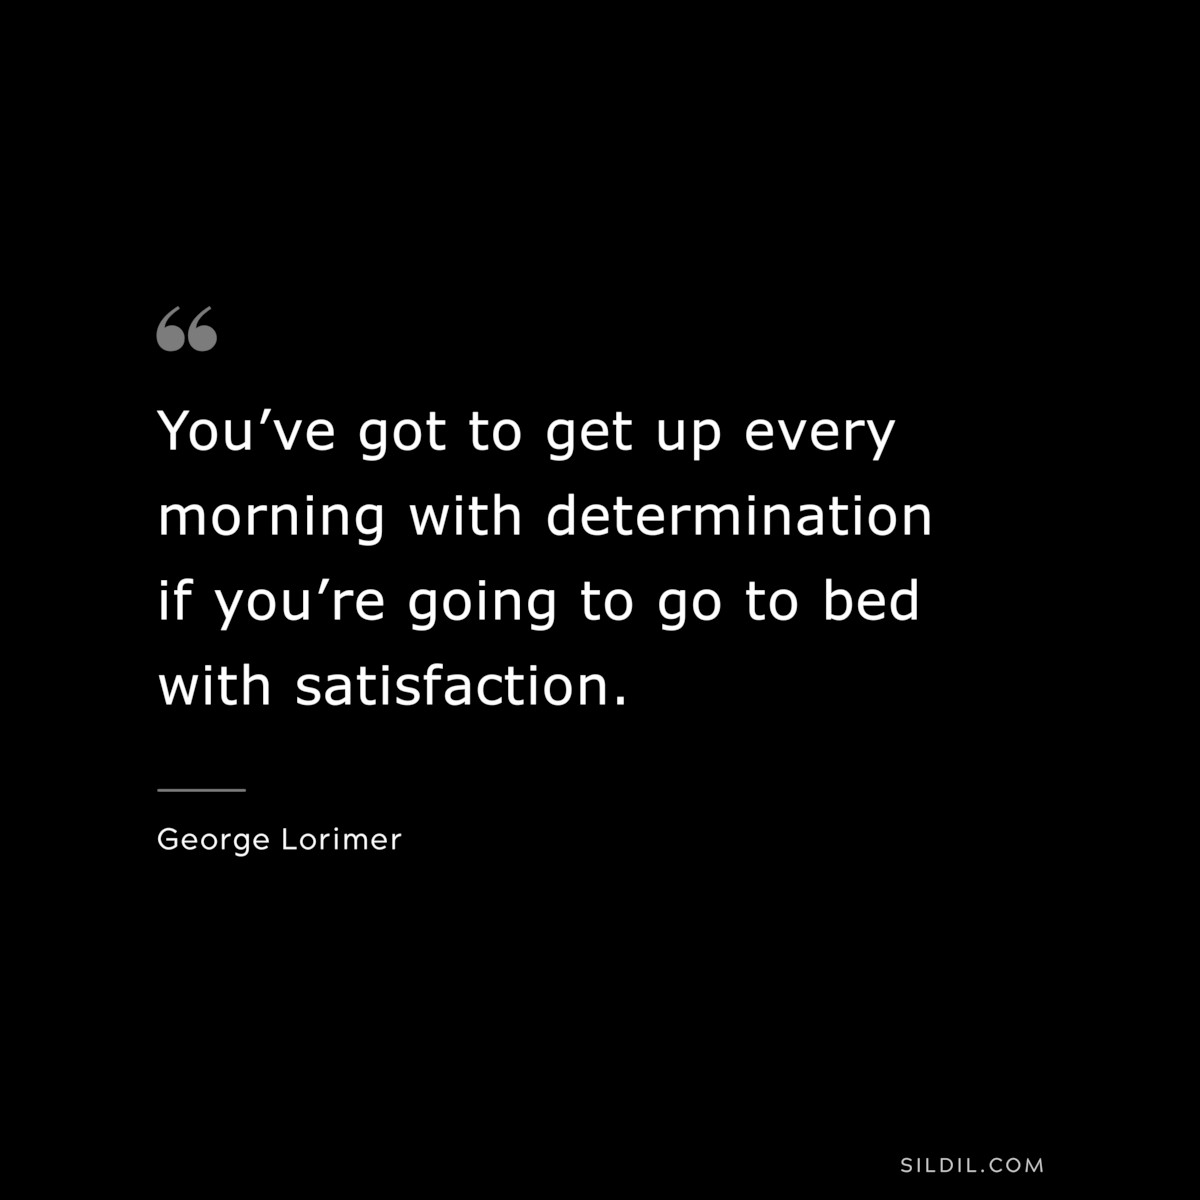 You’ve got to get up every morning with determination if you’re going to go to bed with satisfaction. ― George Lorimer